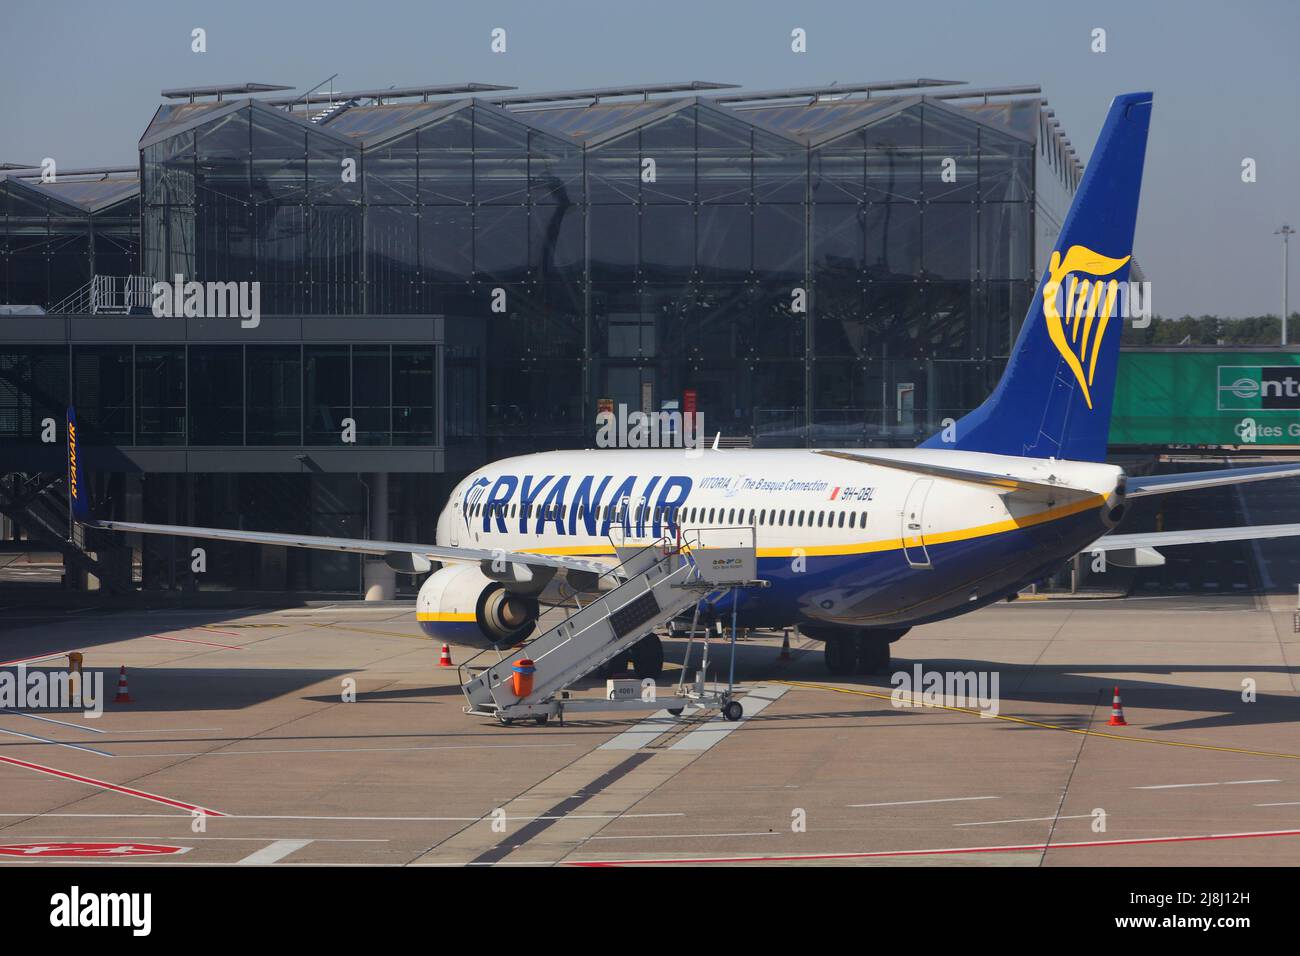 COLOGNE, GERMANY - SEPTEMBER 22, 2020: Ryanair Boeing 737 at Cologne/Bonn Airport, Germany. Cologne/Bonn is the seventh-busiest passenger airport in G Stock Photo